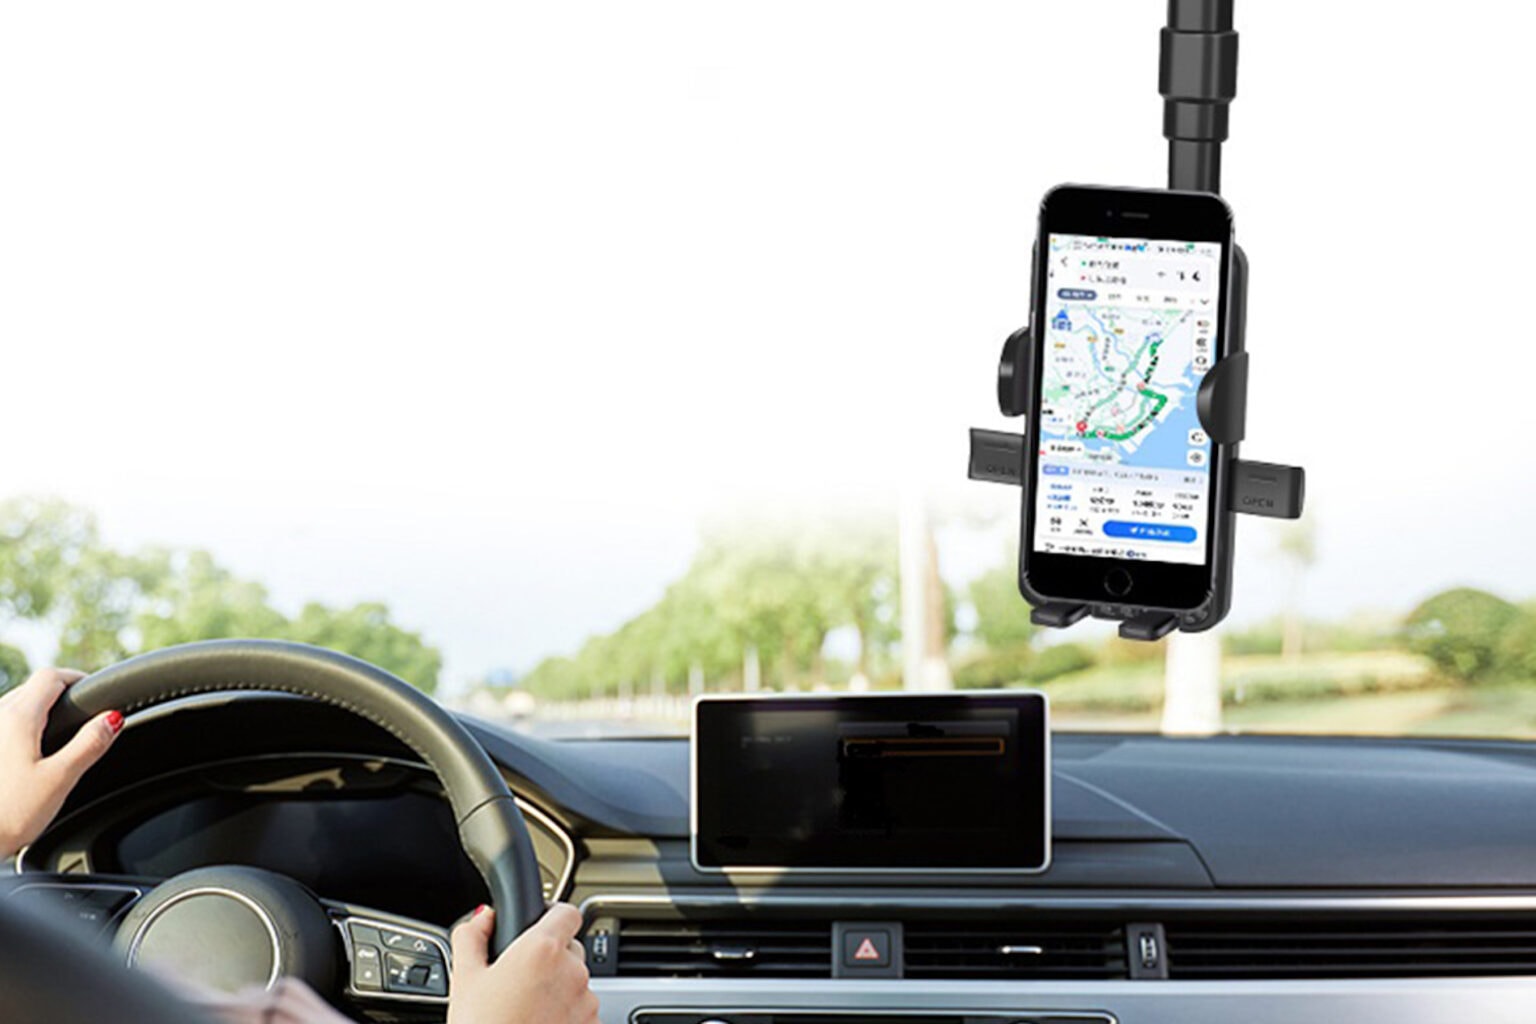 Take your iPhone for a ride with this telescopic car mount.